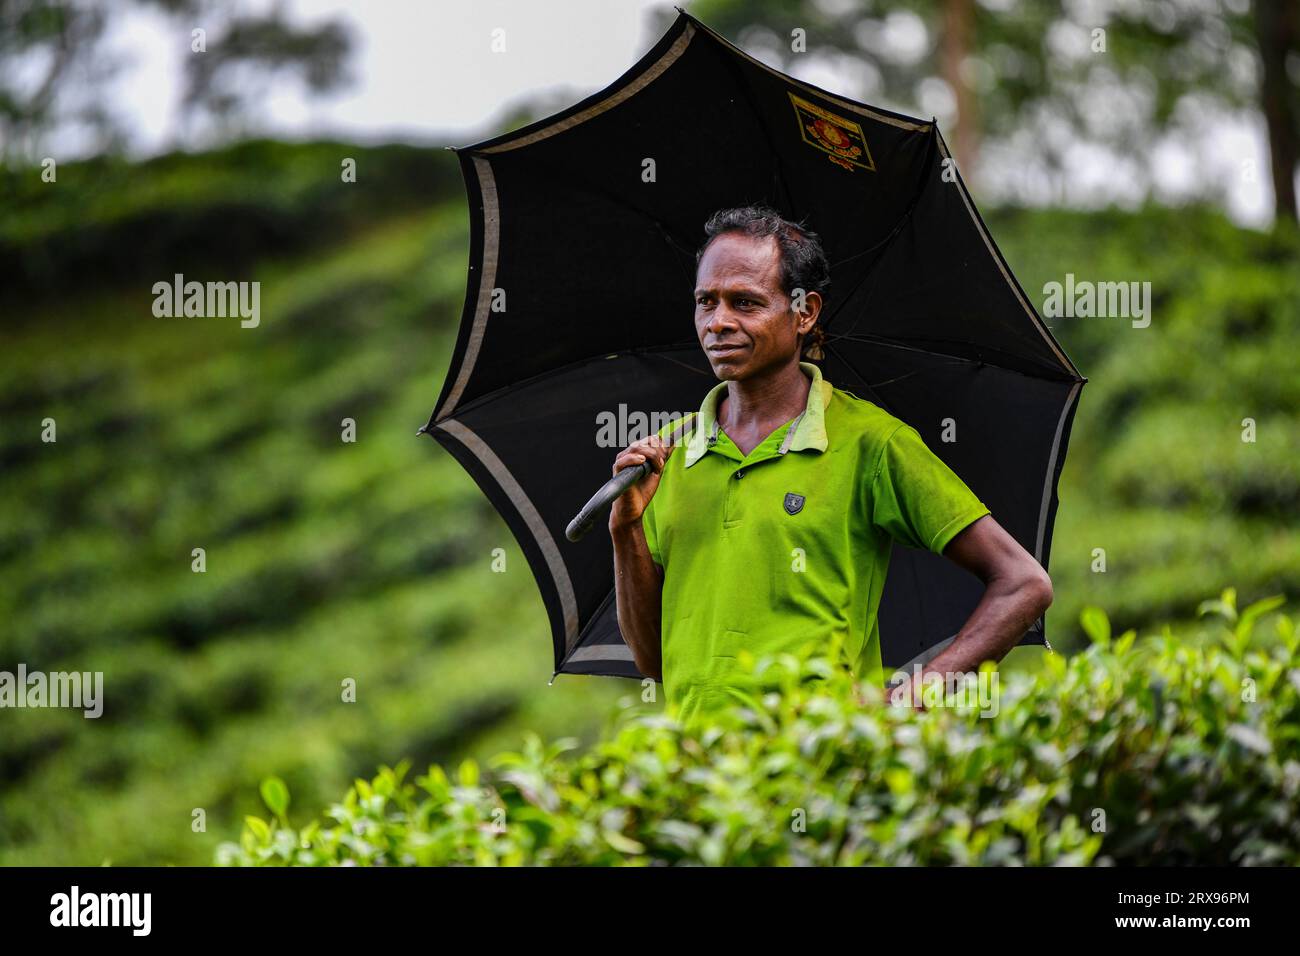 A Bangladeshi man tea garden worker walks at a tea garden in Sylhet. Tea Plucking is a specialized skill. Two leaves and a bud need to be plucked in order to get the best taste and profitability. The calculation of daily wage is 170tk(1.60$) for plucking at least 22-23 kg leaves per day for a worker. The area of Sylhet has over 150 gardens including three of the largest tea gardens in the world both in area and production. Nearly 300,000 workers are employed on the tea estates of which over 75% are women but they are passing their lives as a slave. Stock Photo